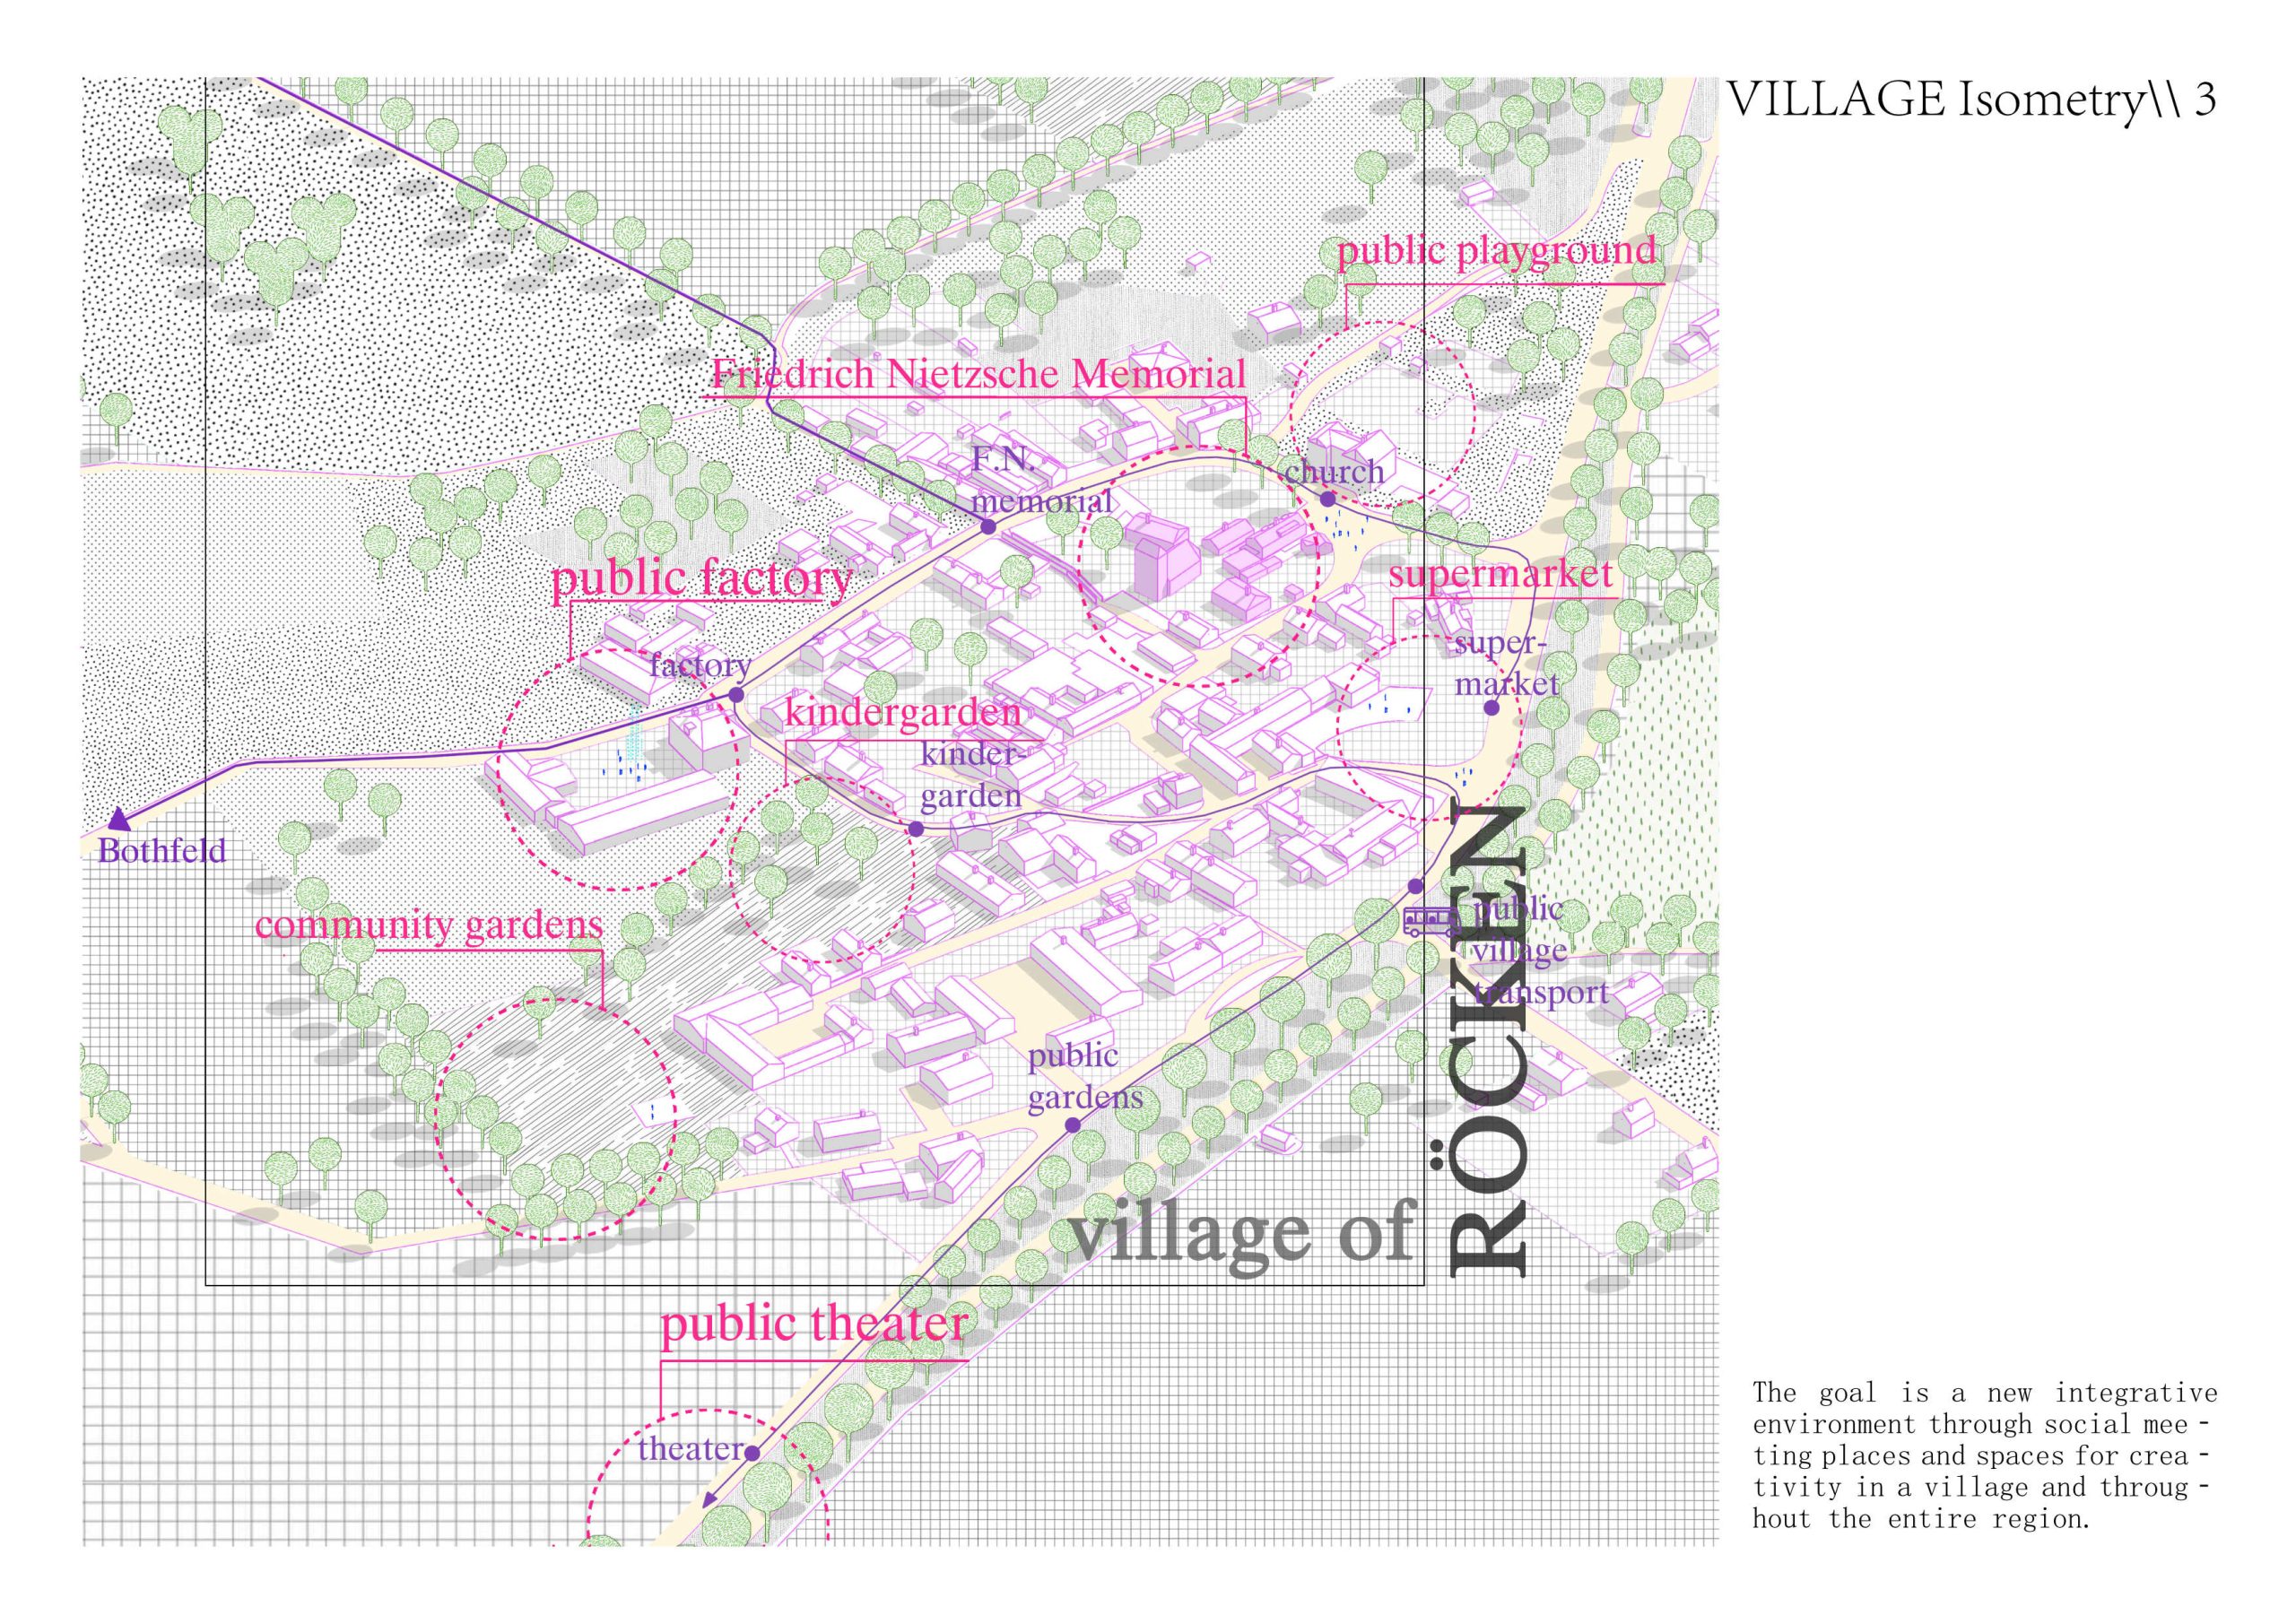  Selected project – Franziska Michl  – Rethinking villages, Reinventing rurbanism  Perspektive